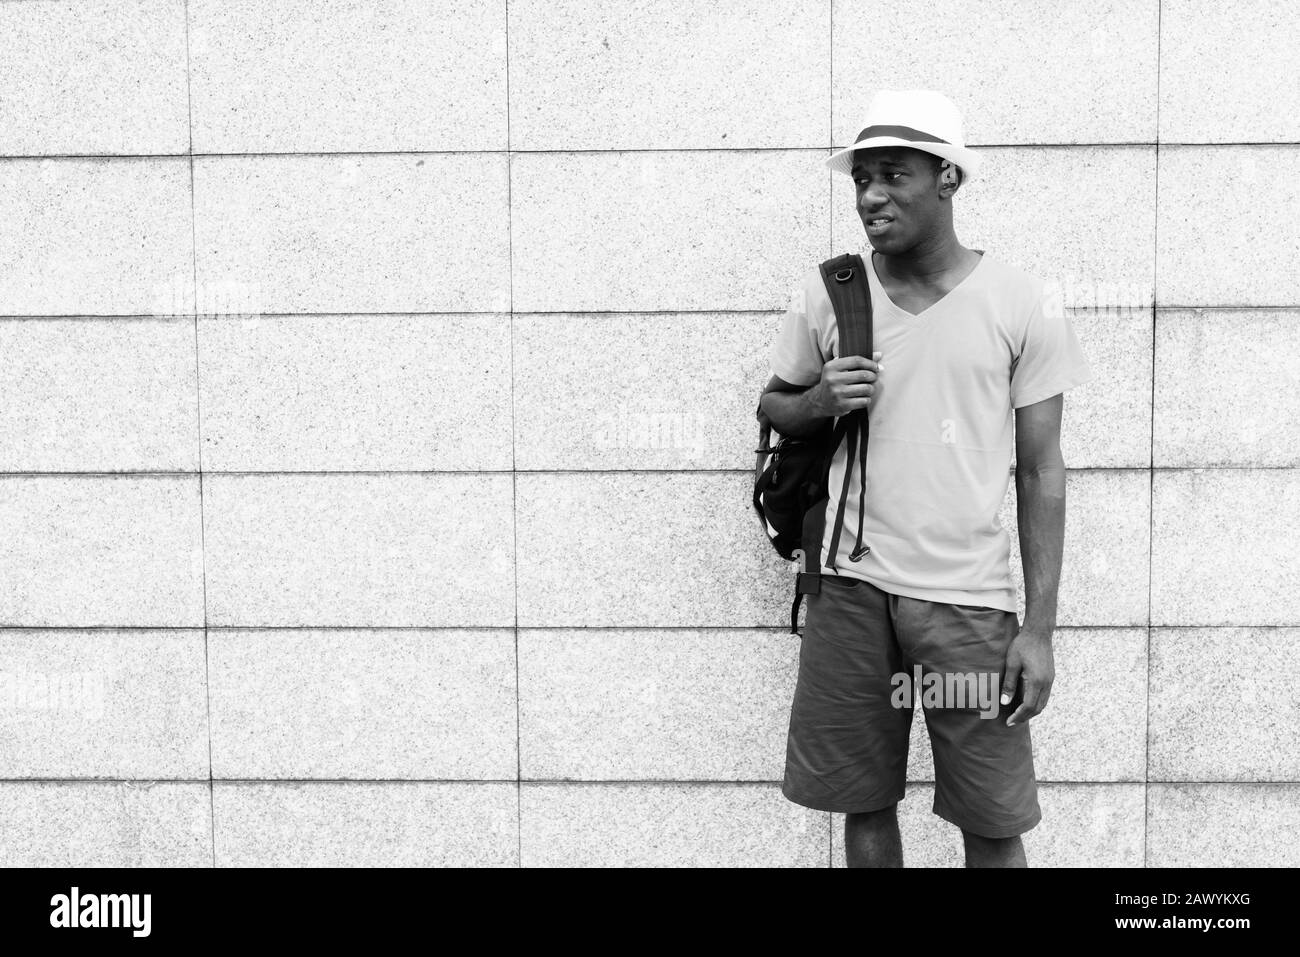 Young African tourist man standing and thinking while holding backpack against concrete block wall Stock Photo